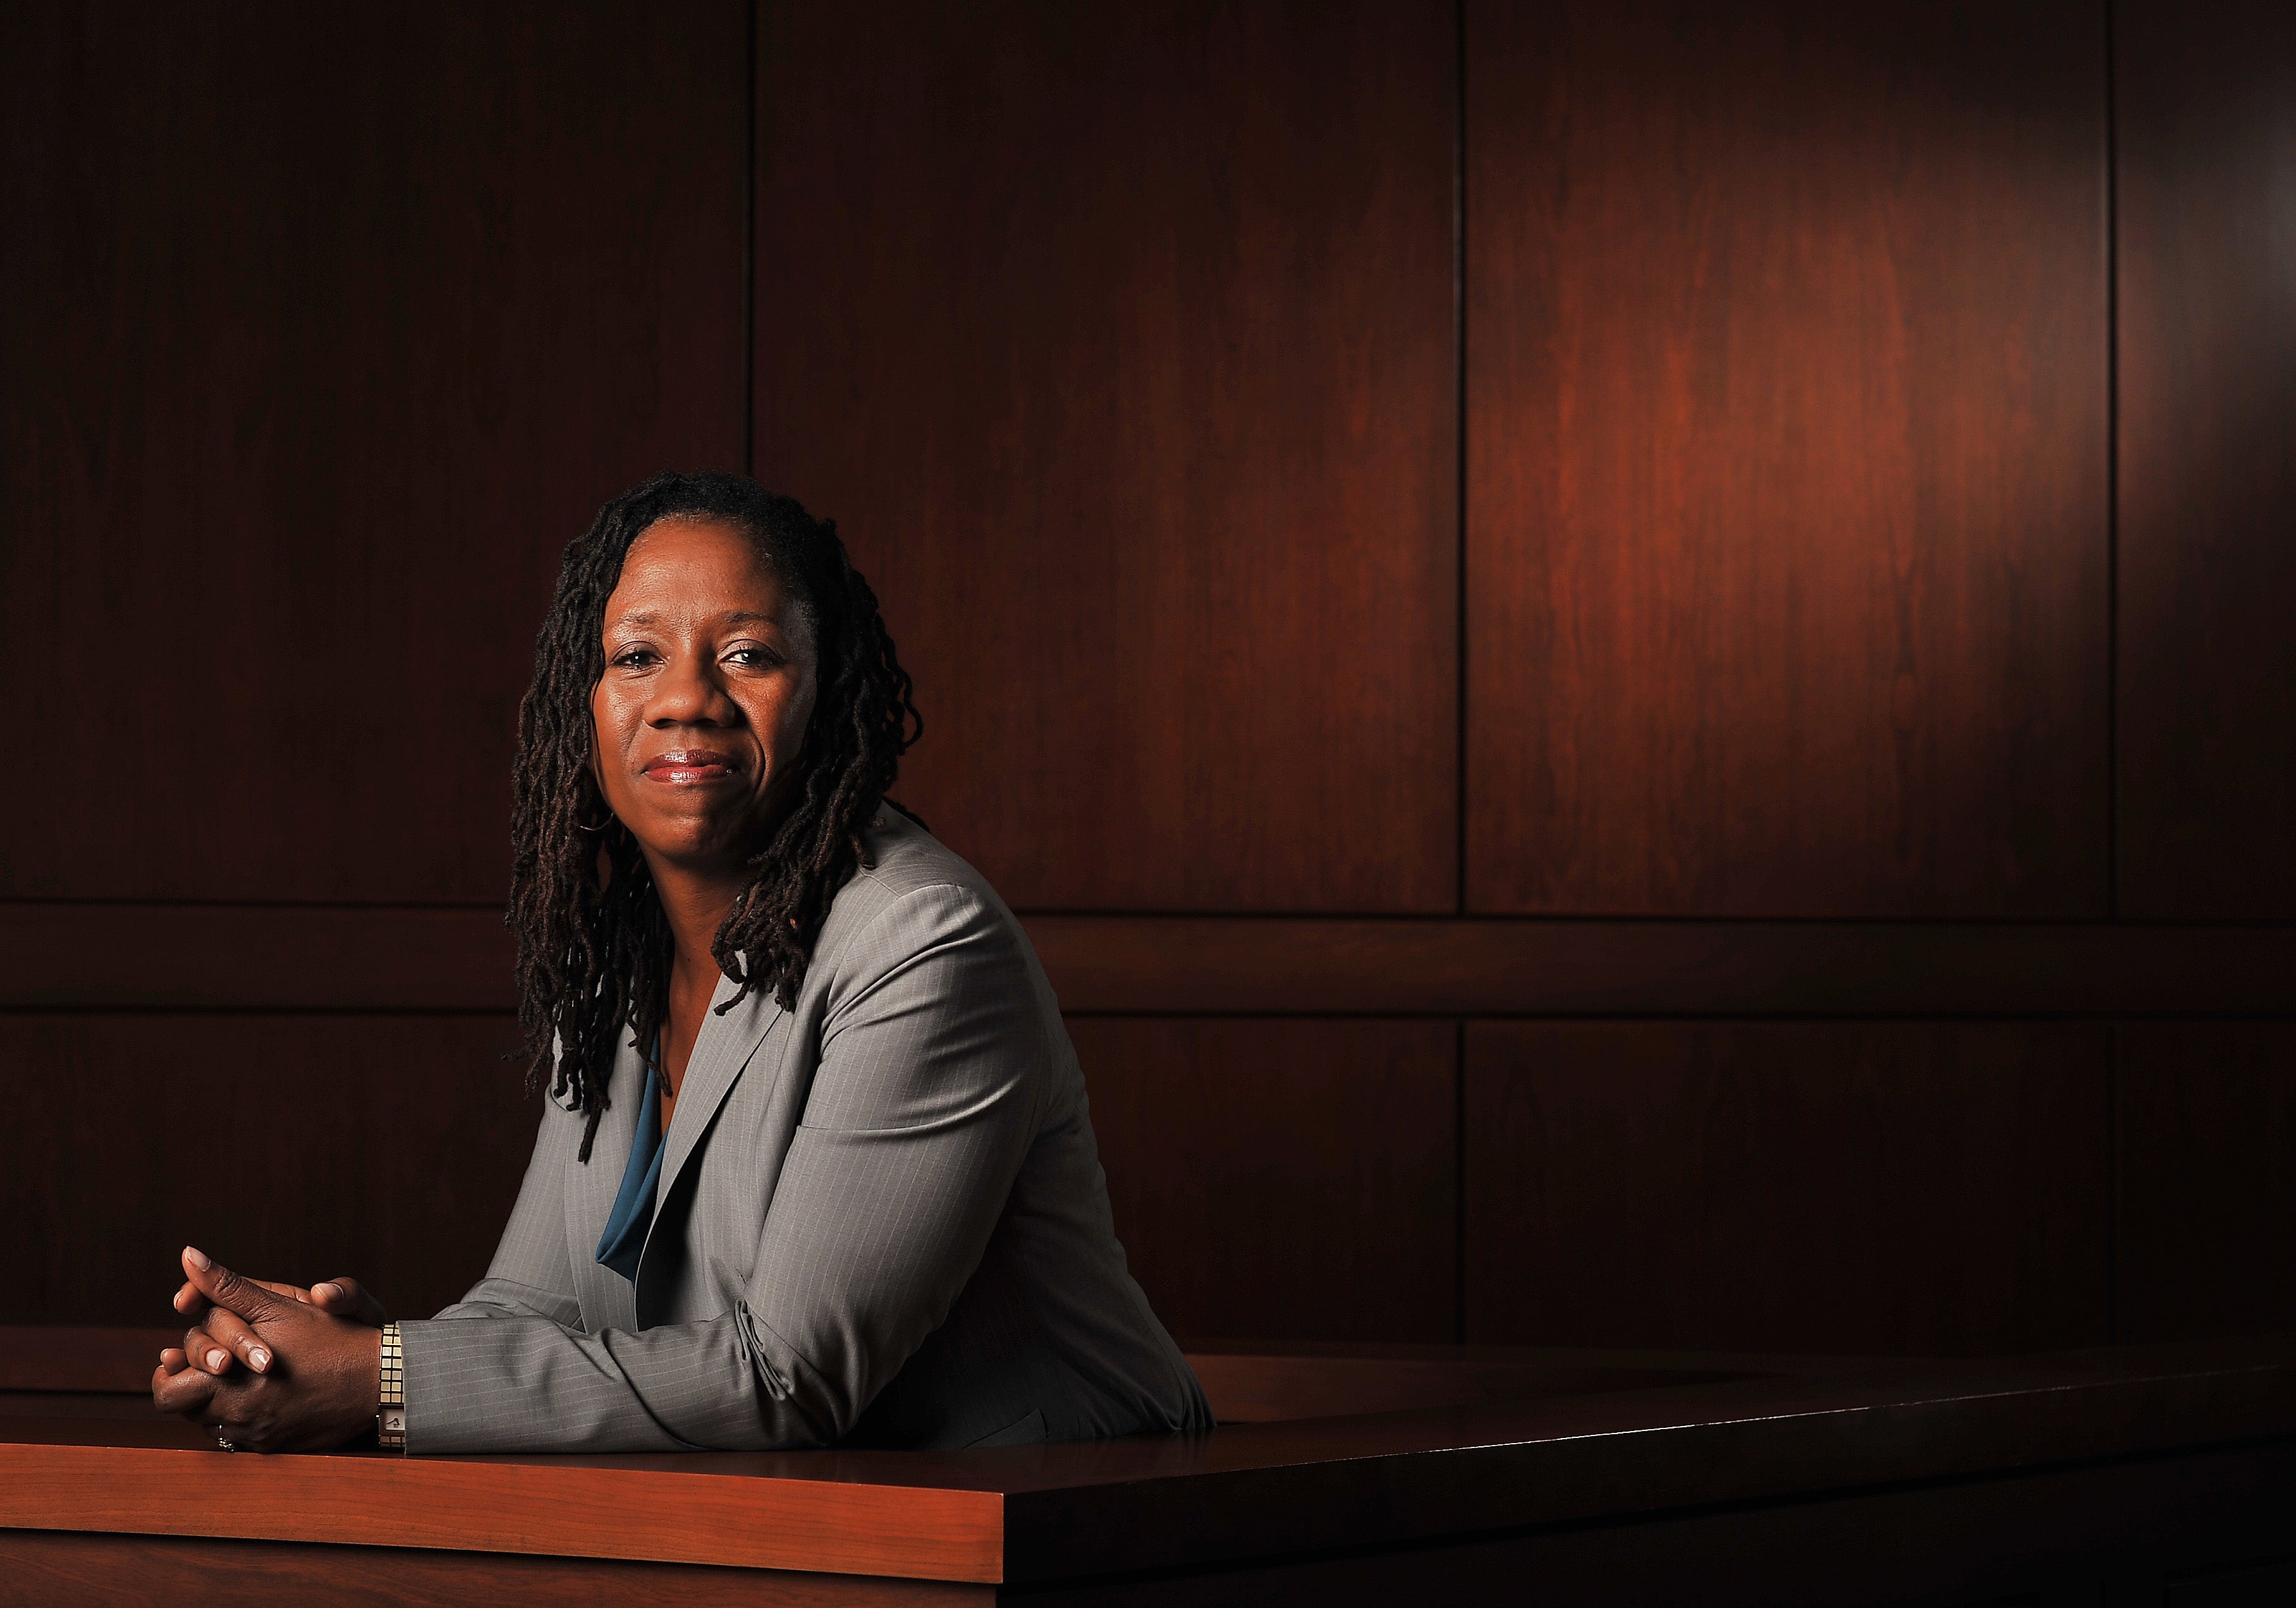 'The Country Has To See Itself:' 2017 MAKERS Honoree Sherrilyn Ifill On Civil Rights In The Current Political Climate
